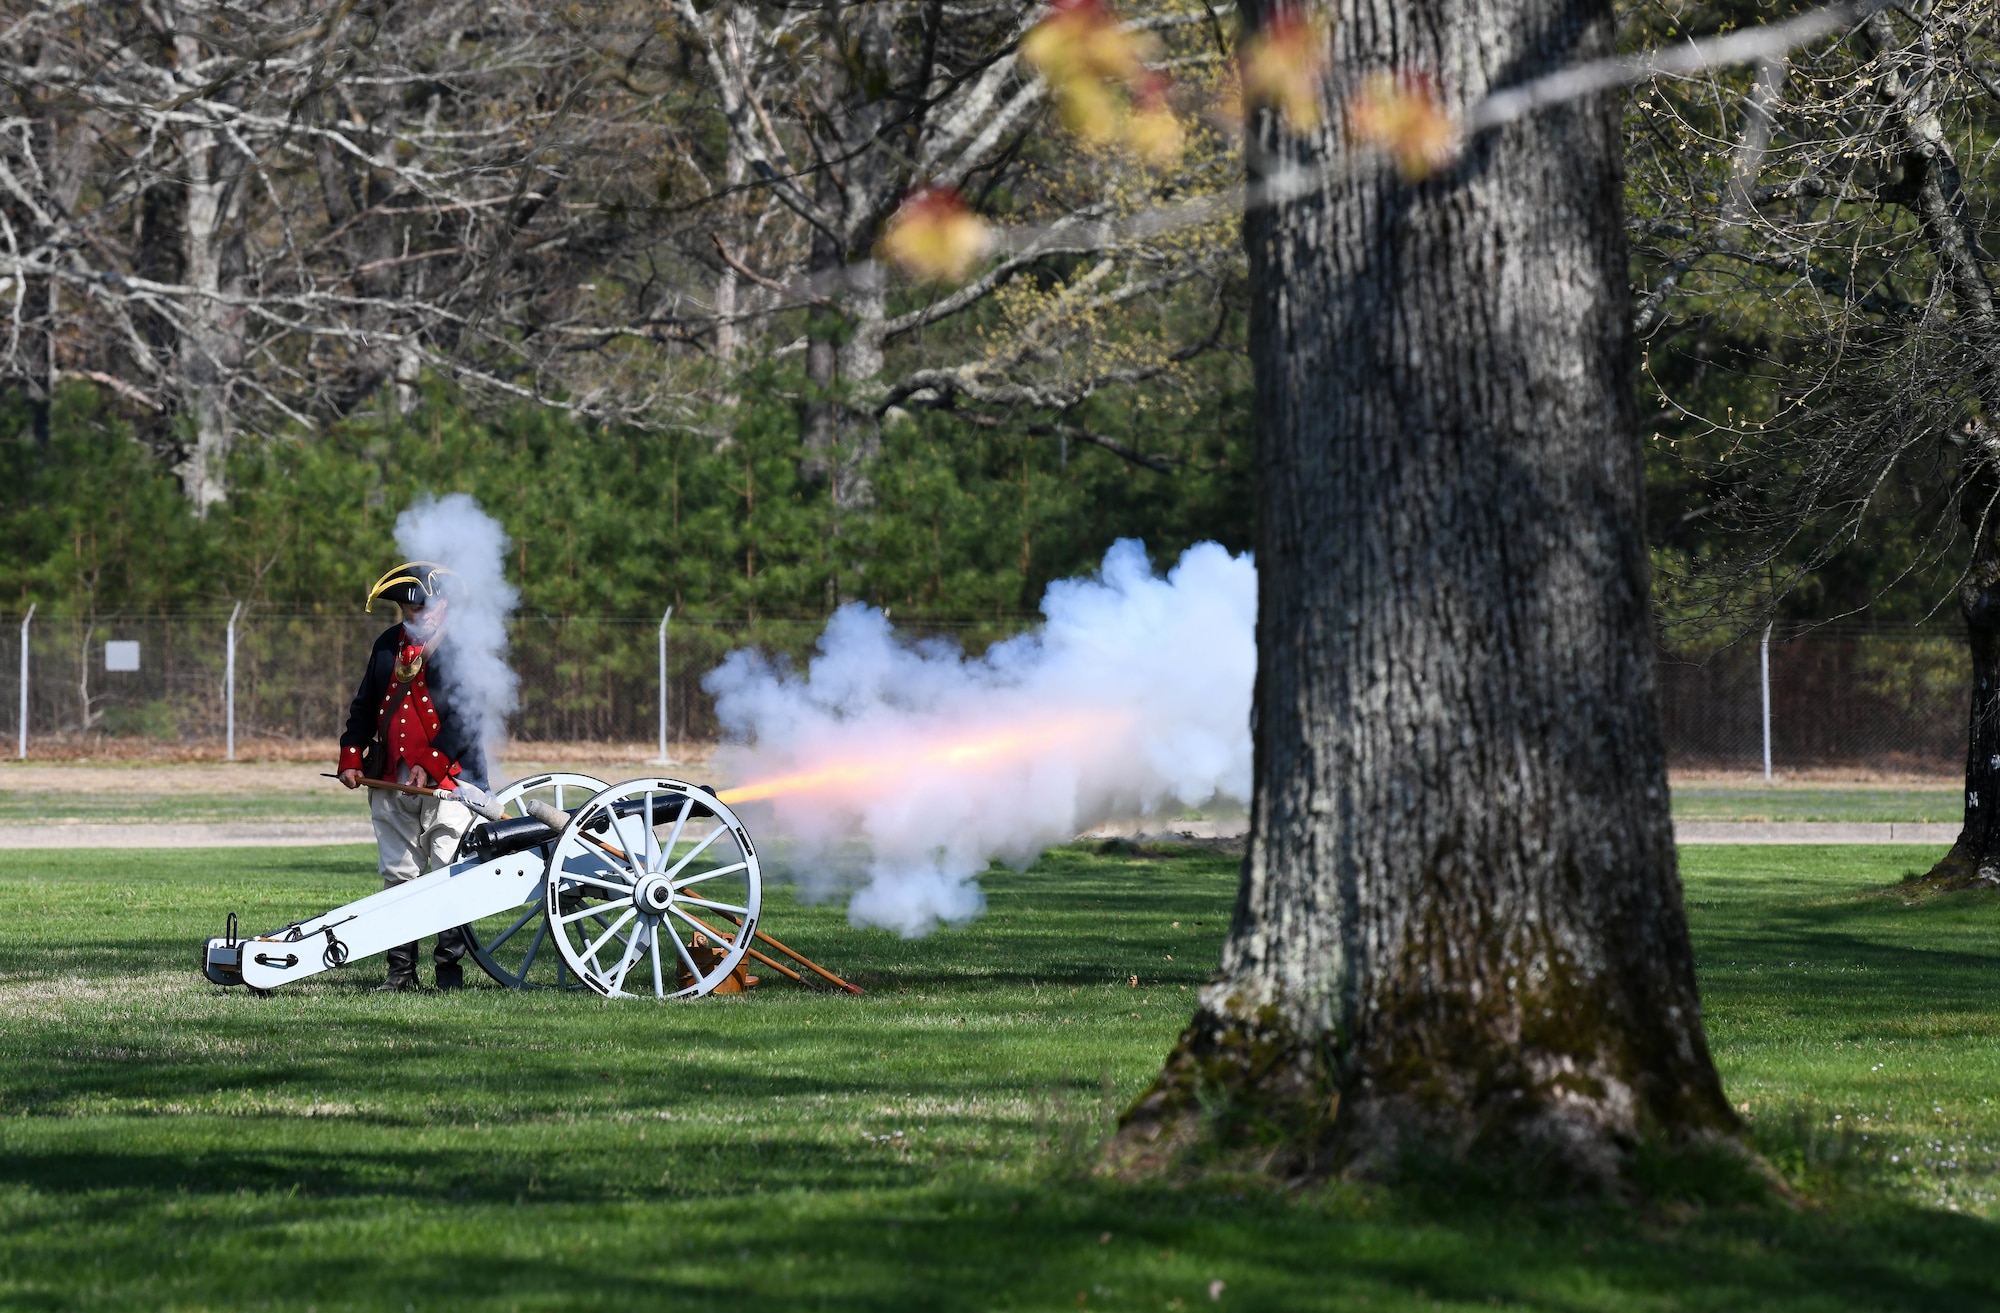 Steve Gaines, president of the Tennessee Society of the Sons of the American Revolution, fires a cannon during a flag retreat ceremony held to mark the end of Extremism Stand Down exercises, April 6, 2021, at Arnold Air Force Base, Tenn. Gaines spoke about the history of the U.S. Constitution during the proceedings. (U.S. Air Force photo by Jill Pickett)